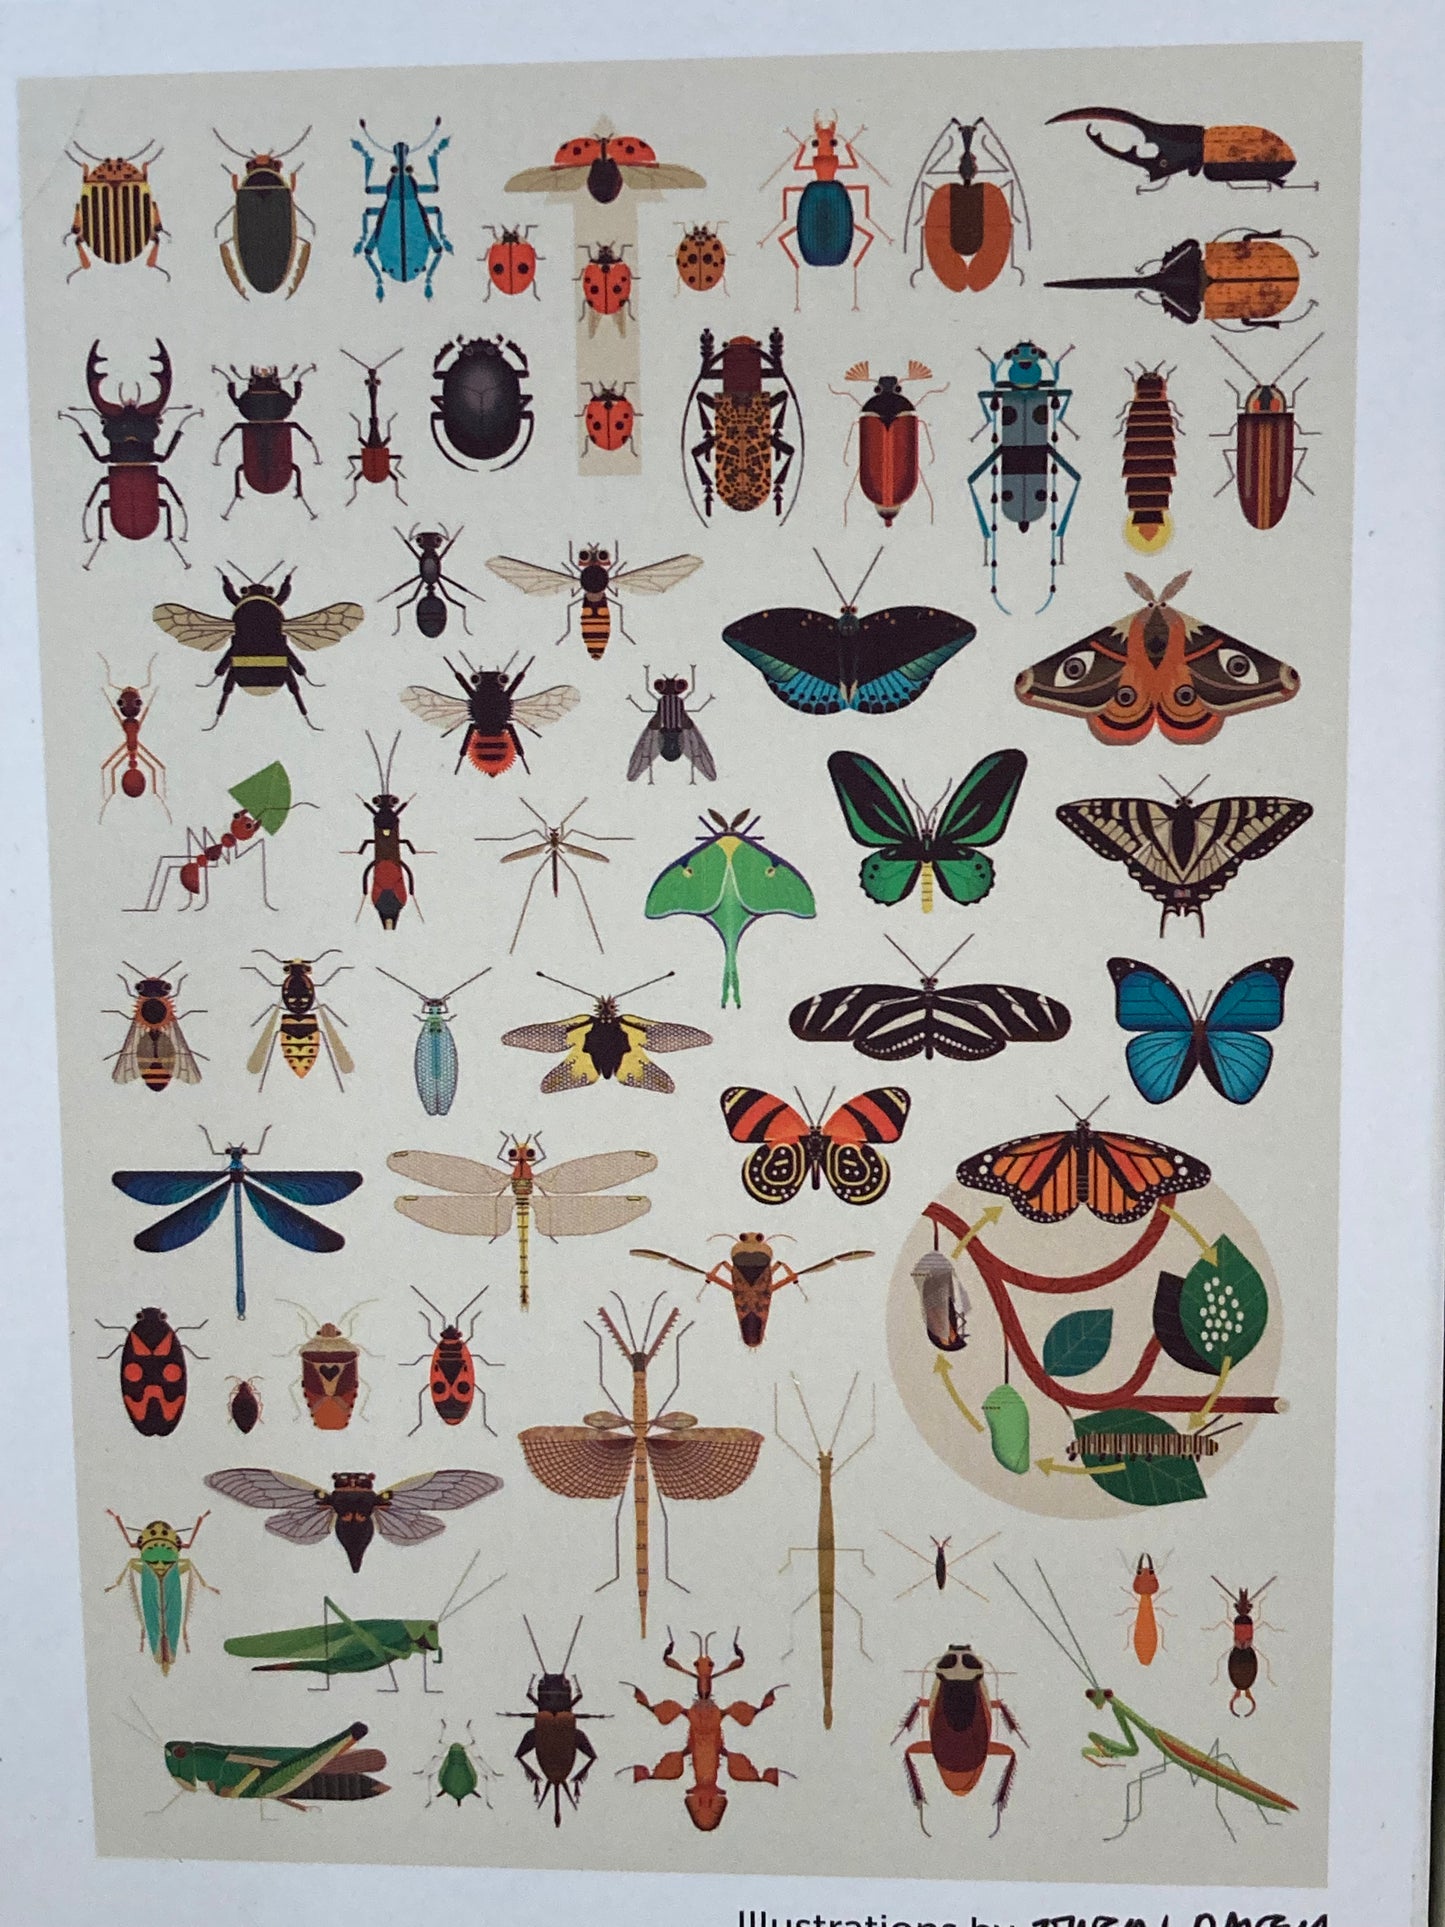 Educational Puzzle - INSECTS, with 500 pieces!